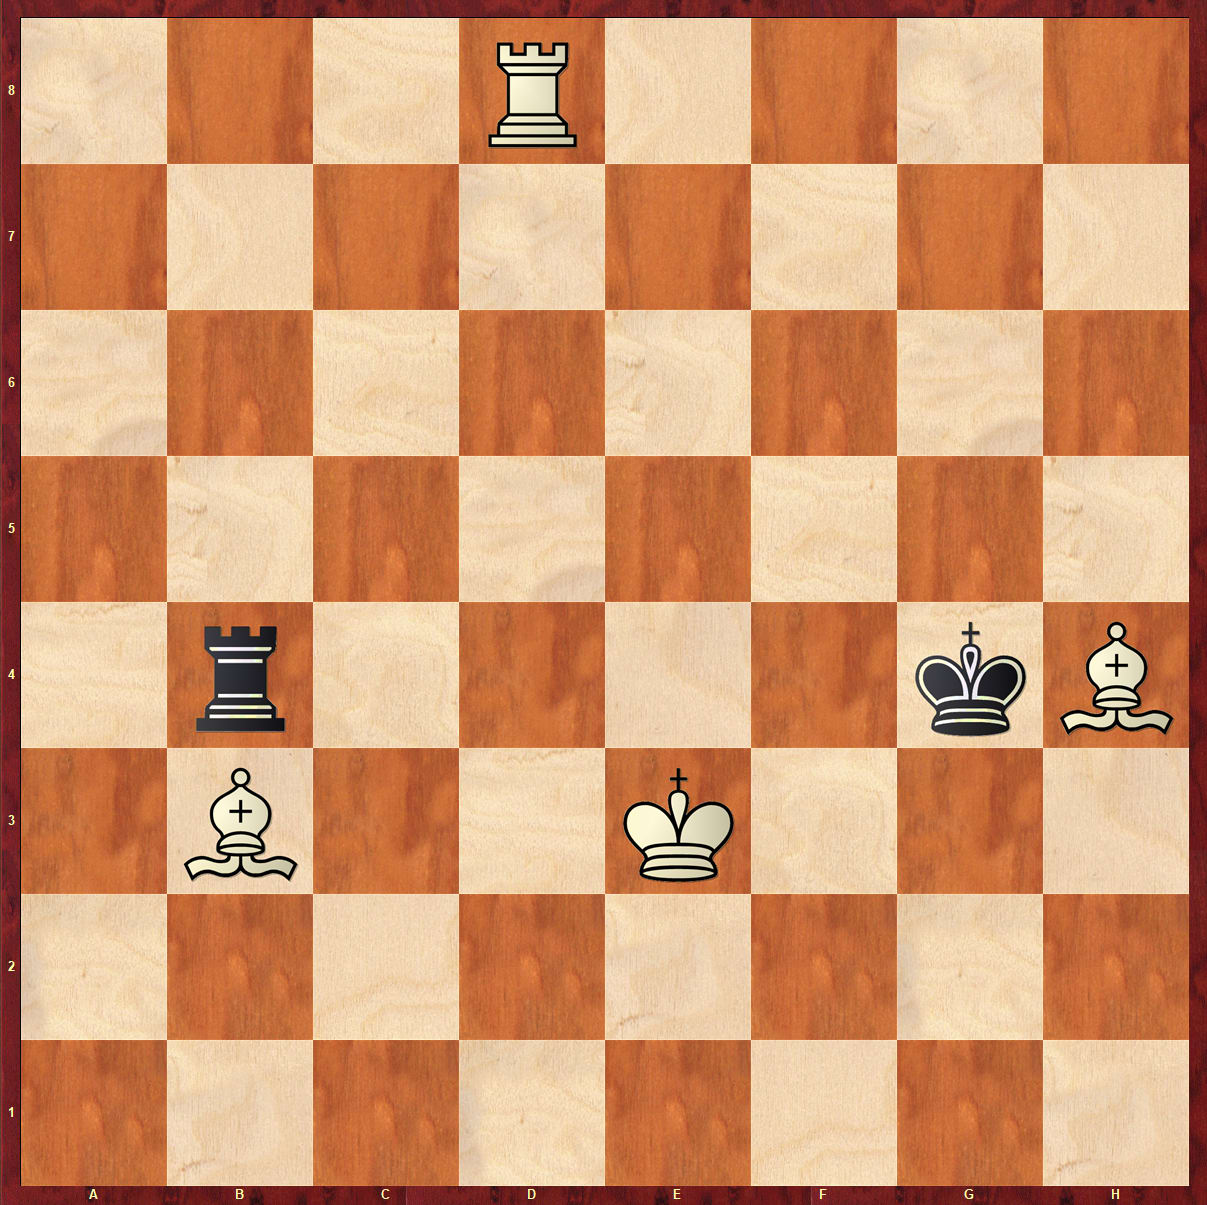 White to move and win, can you save the bishops?